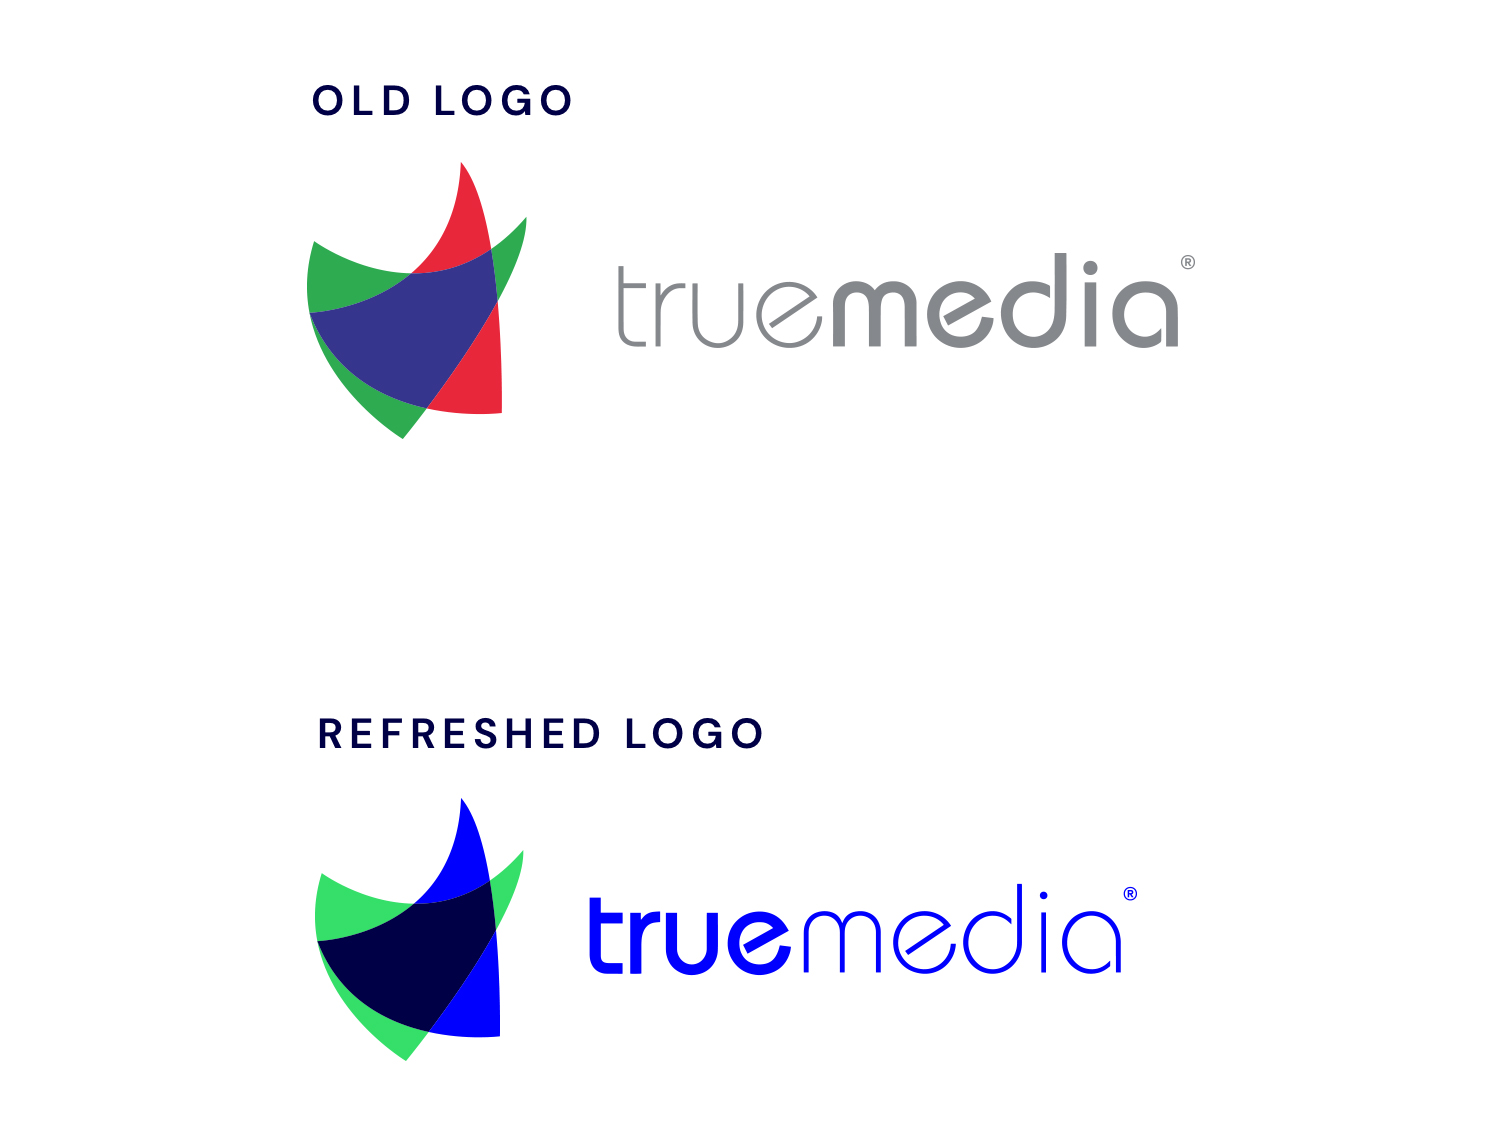 True Media's old logo and its new logo, with emphasis going from 'media' to 'true'